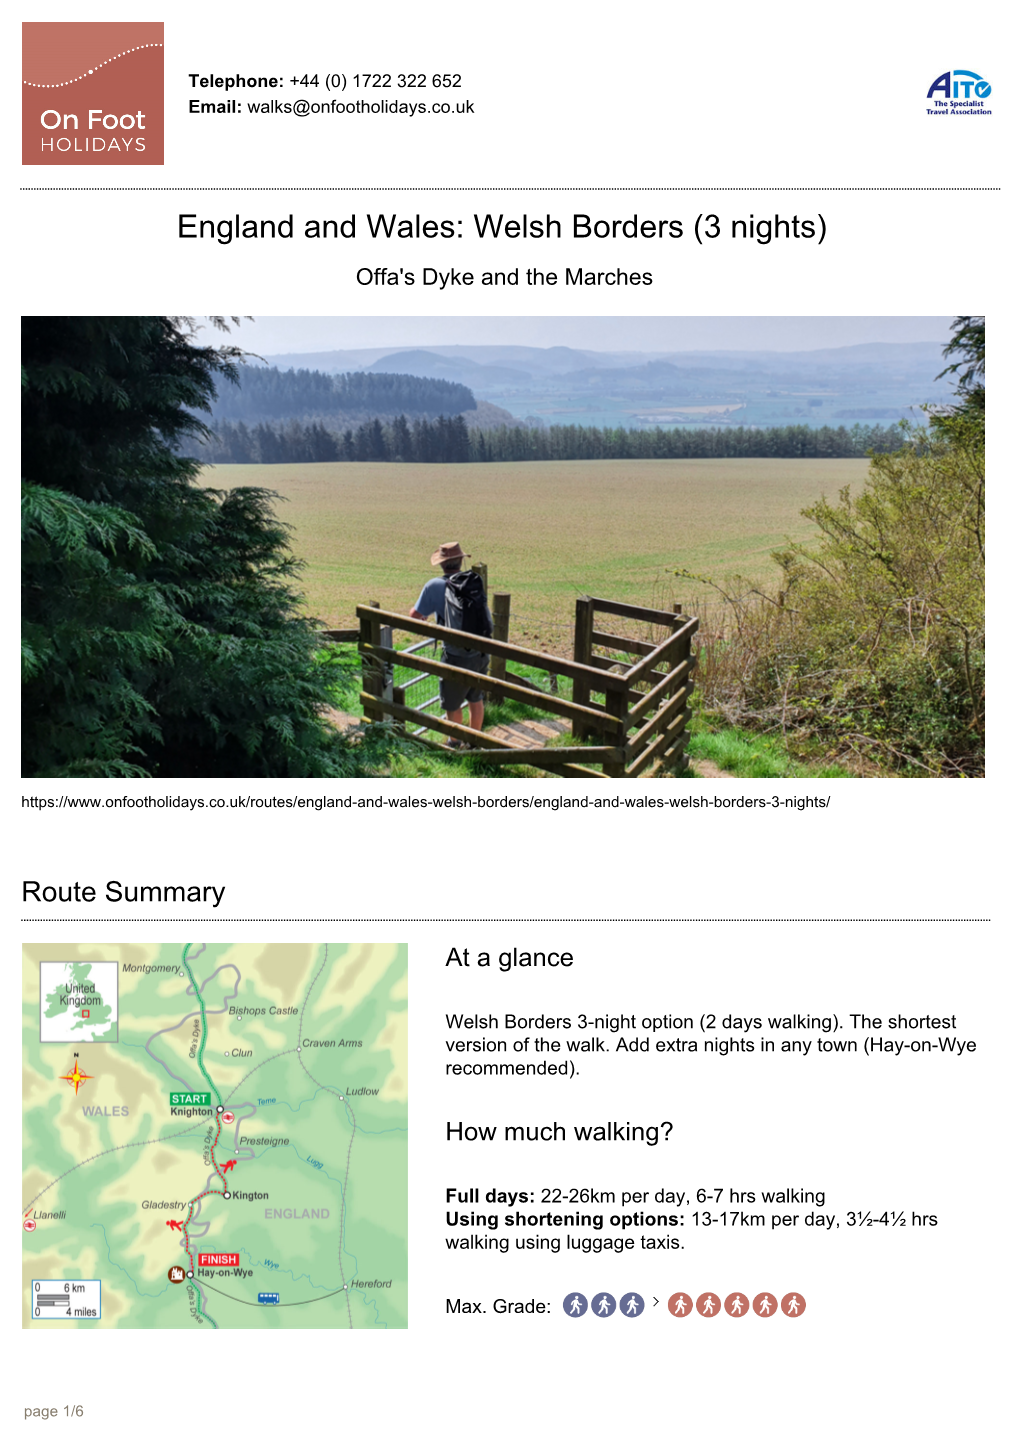 Welsh Borders (3 Nights) Offa's Dyke and the Marches